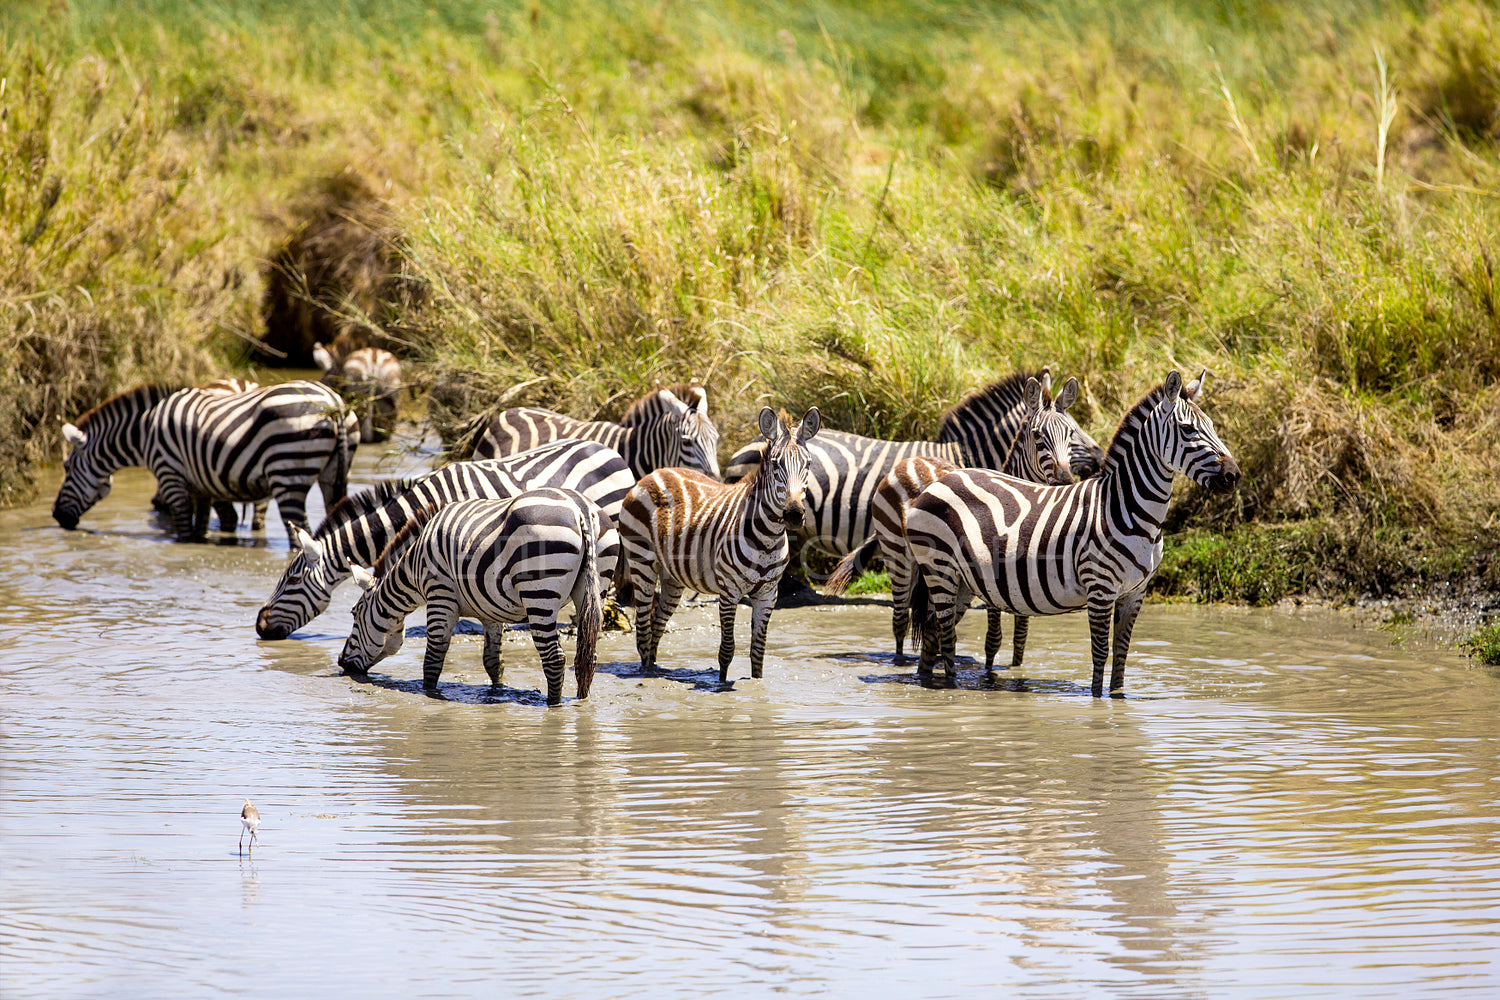 Zebras drinks of a water hole